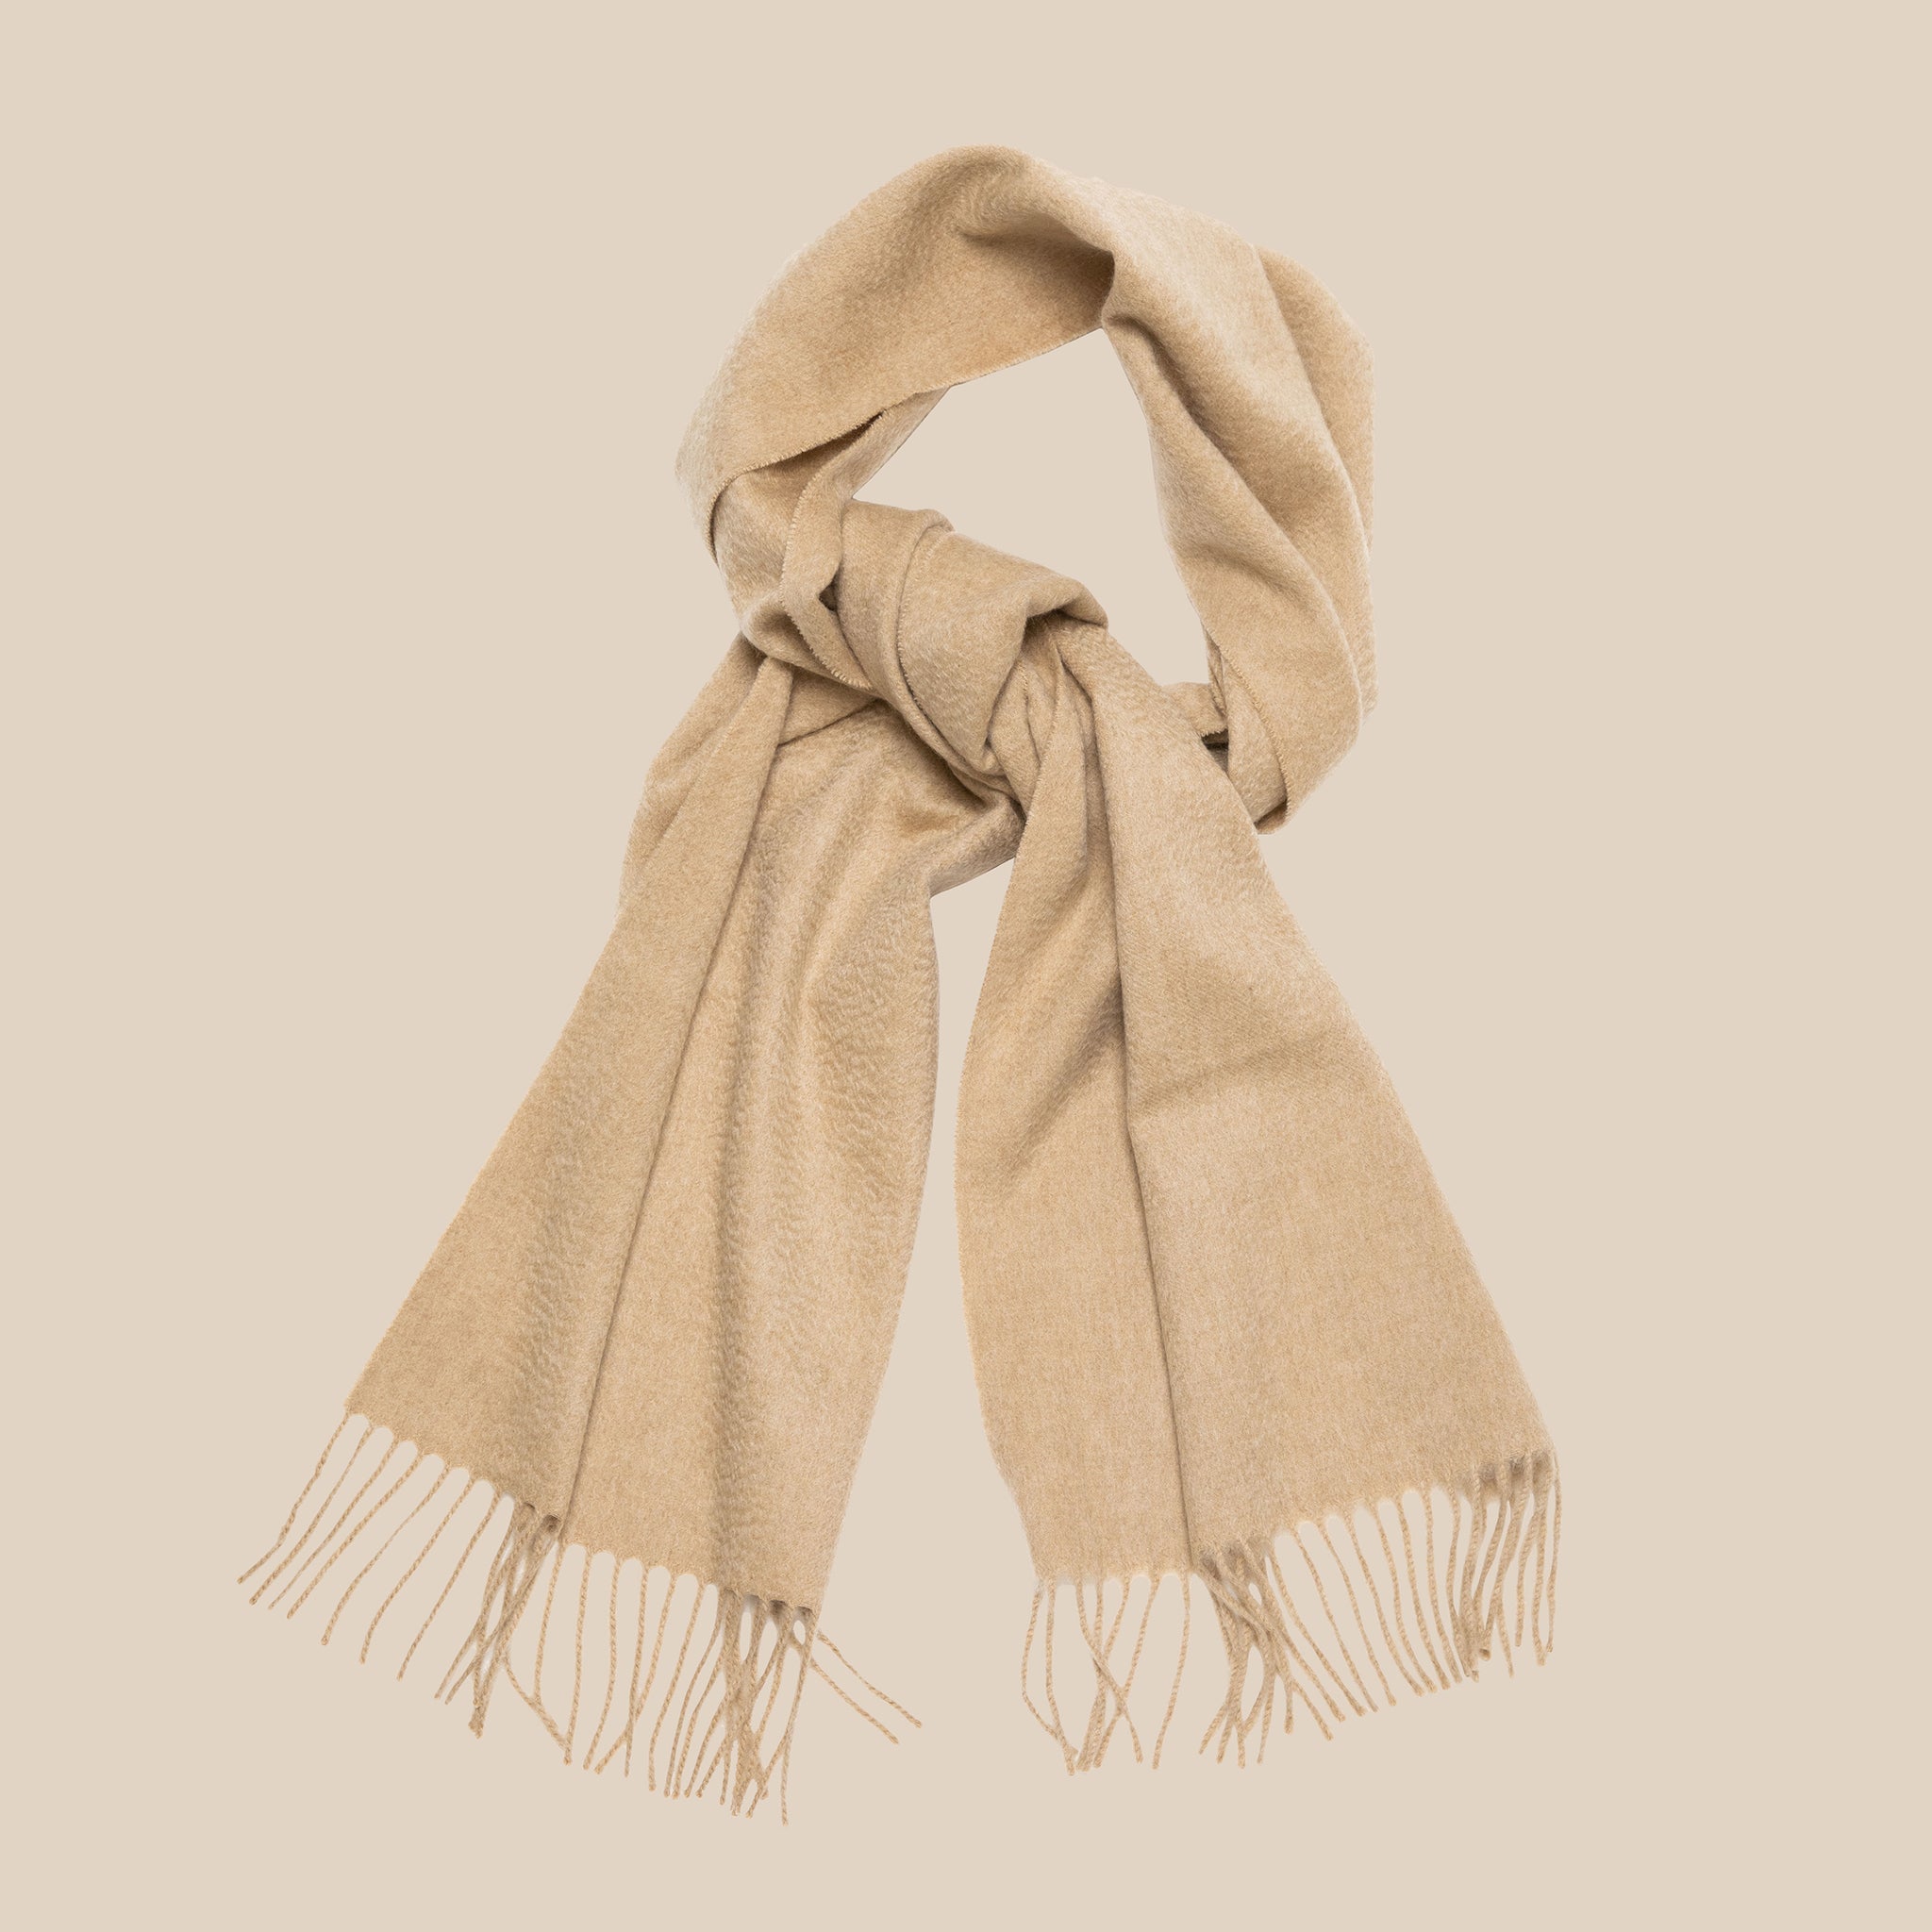 Woven cashmere scarf in oatmeal - Colhay's